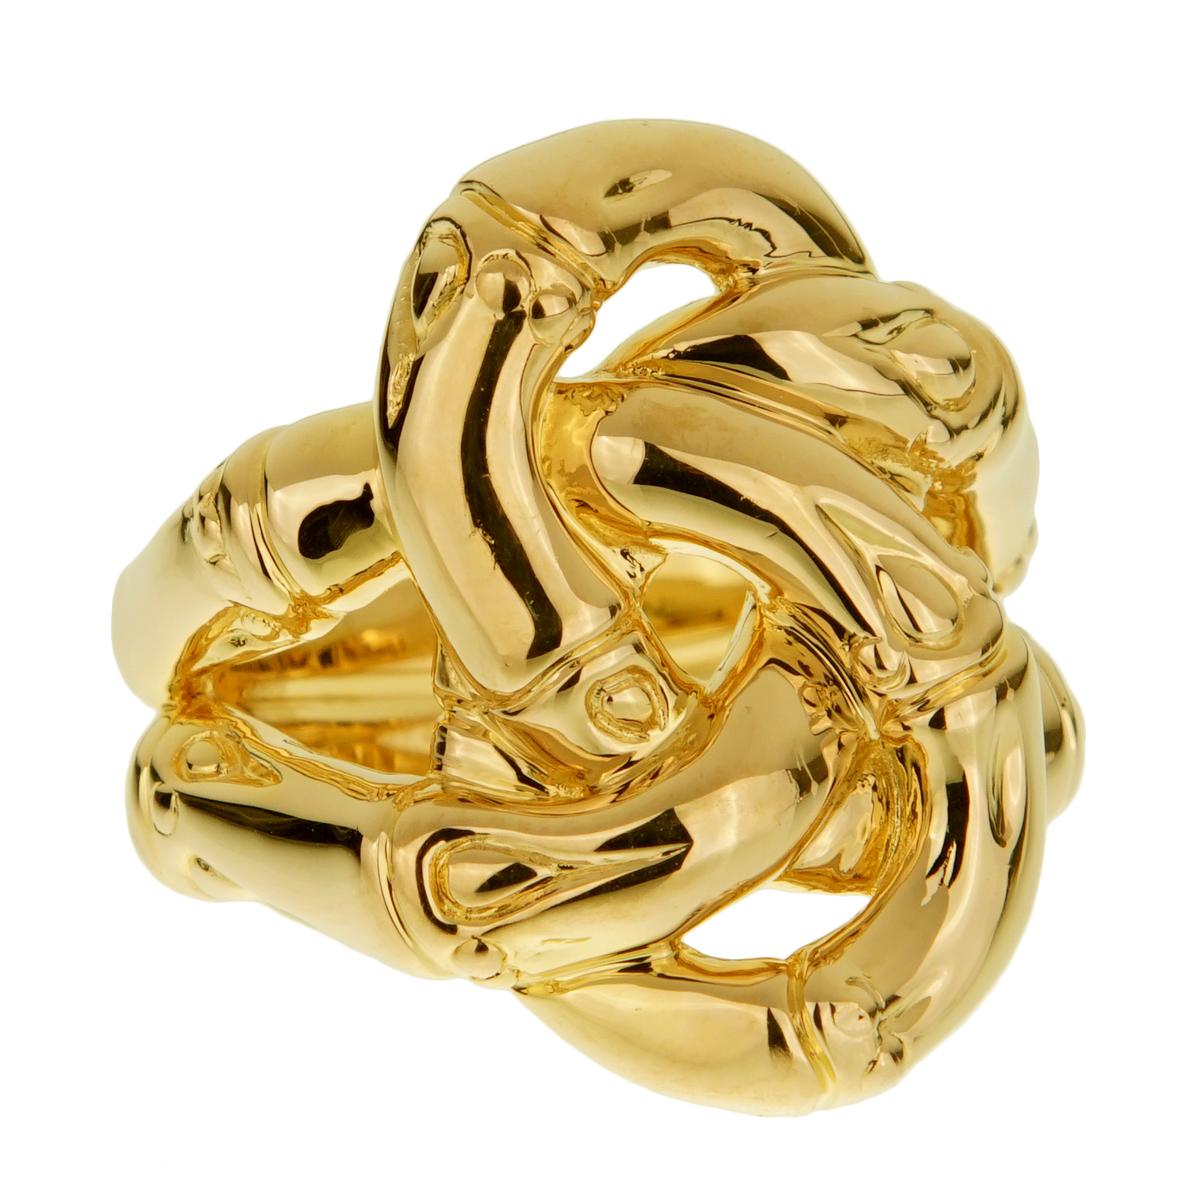 An iconic design by John Hardy showcasing a double bamboo knot in 18k yellow gold.